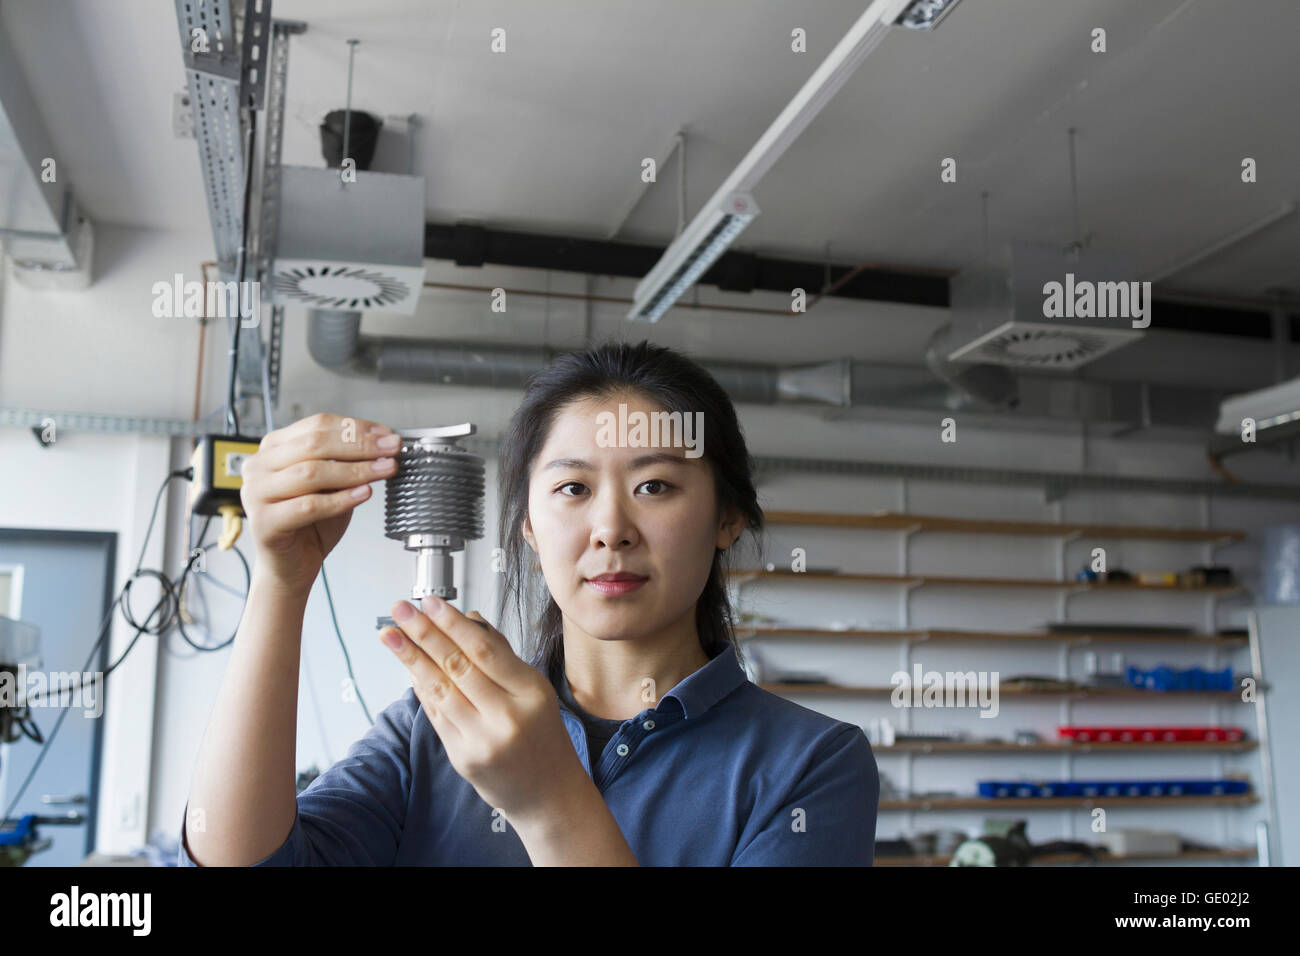 Young female engineer working in an industrial plant, Freiburg im Breisgau, Baden-Württemberg, Germany Stock Photo